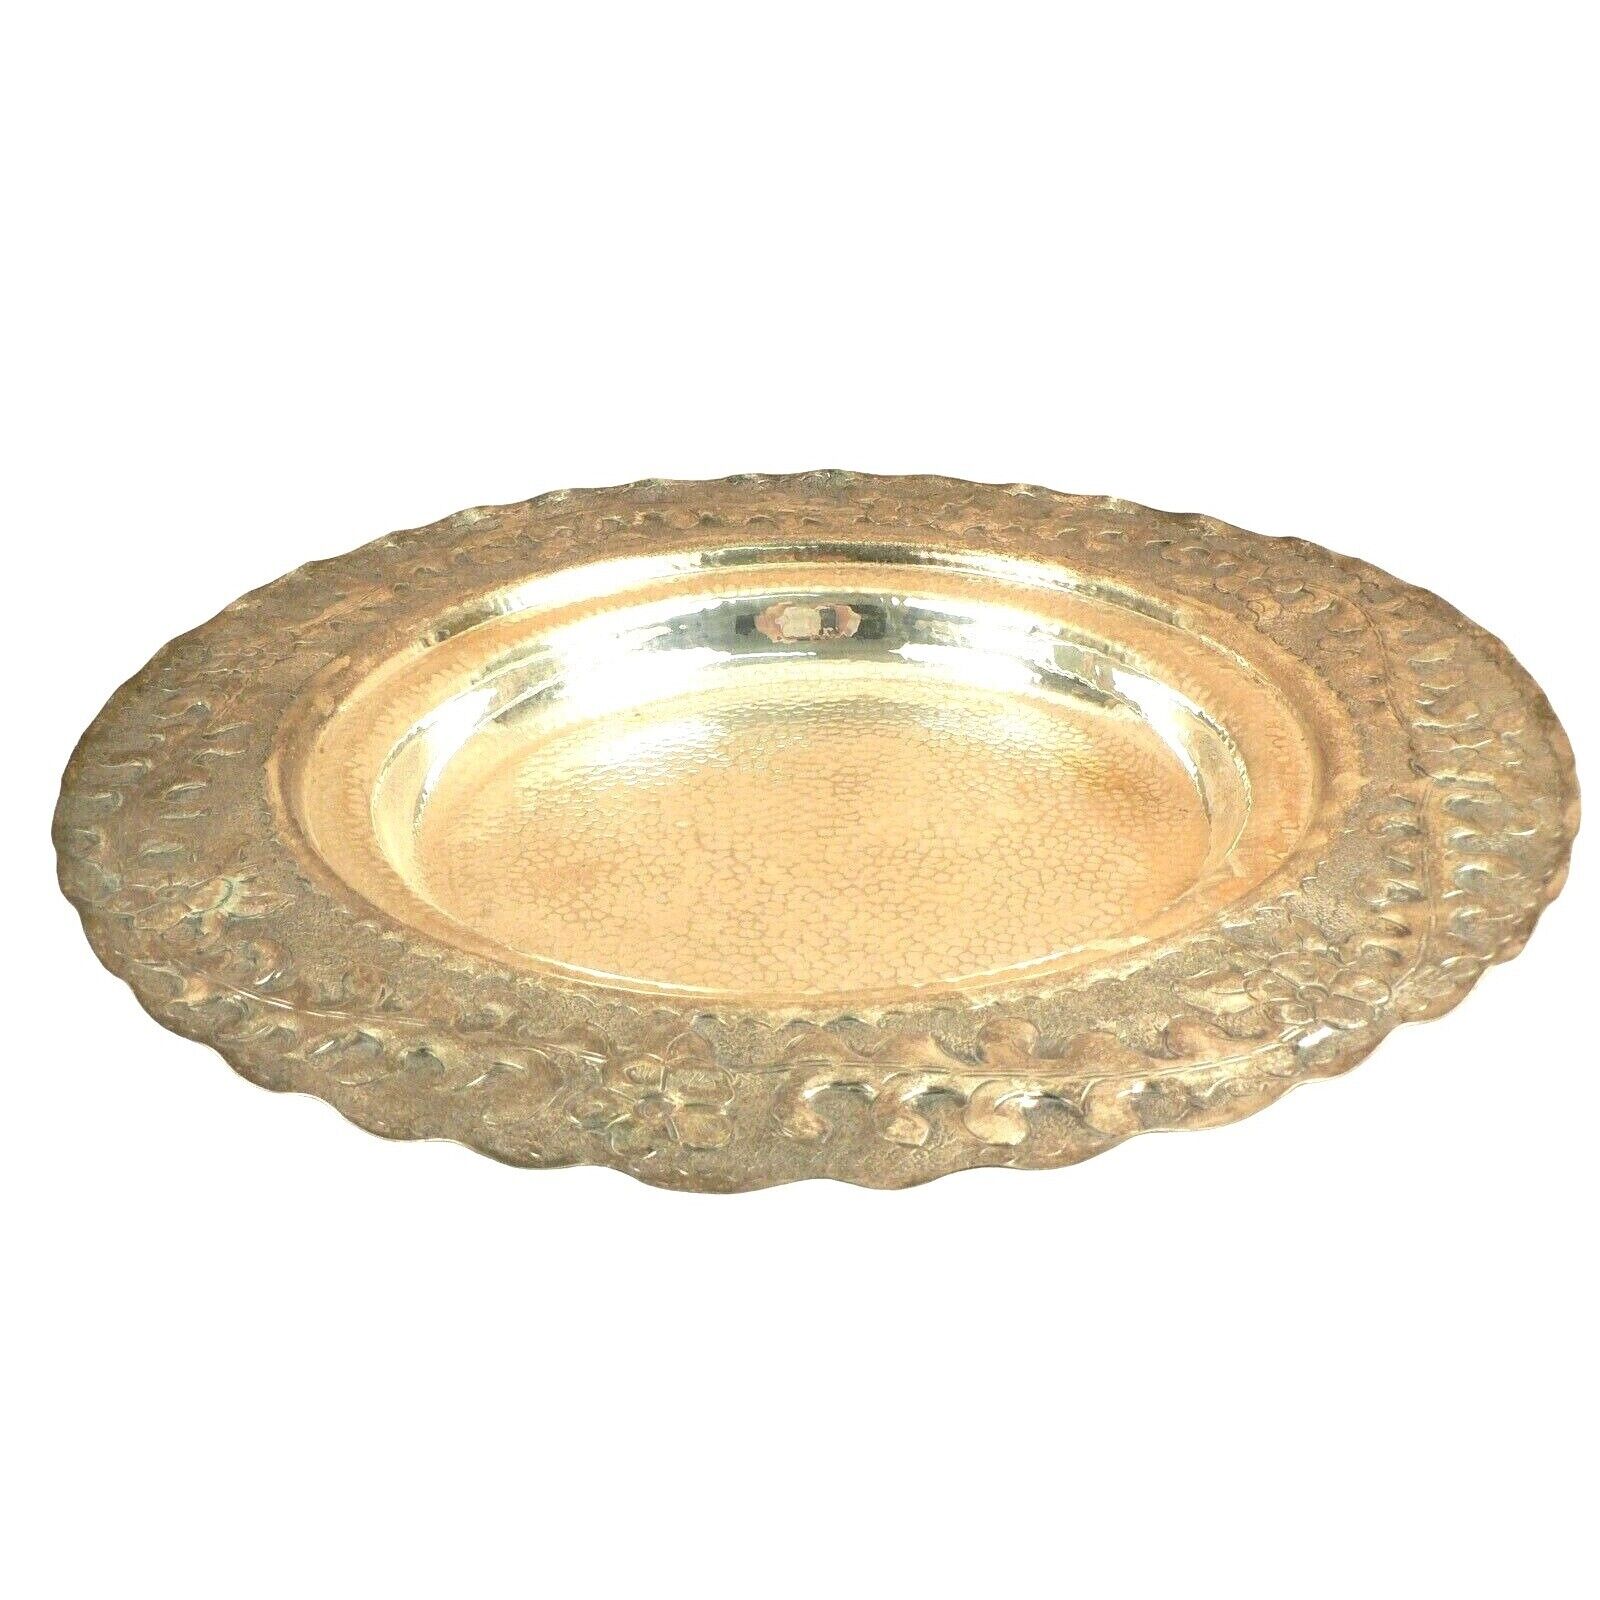 Round Serving Tray Footed Hammered Texture Finish 2 Recessed Areas Silver